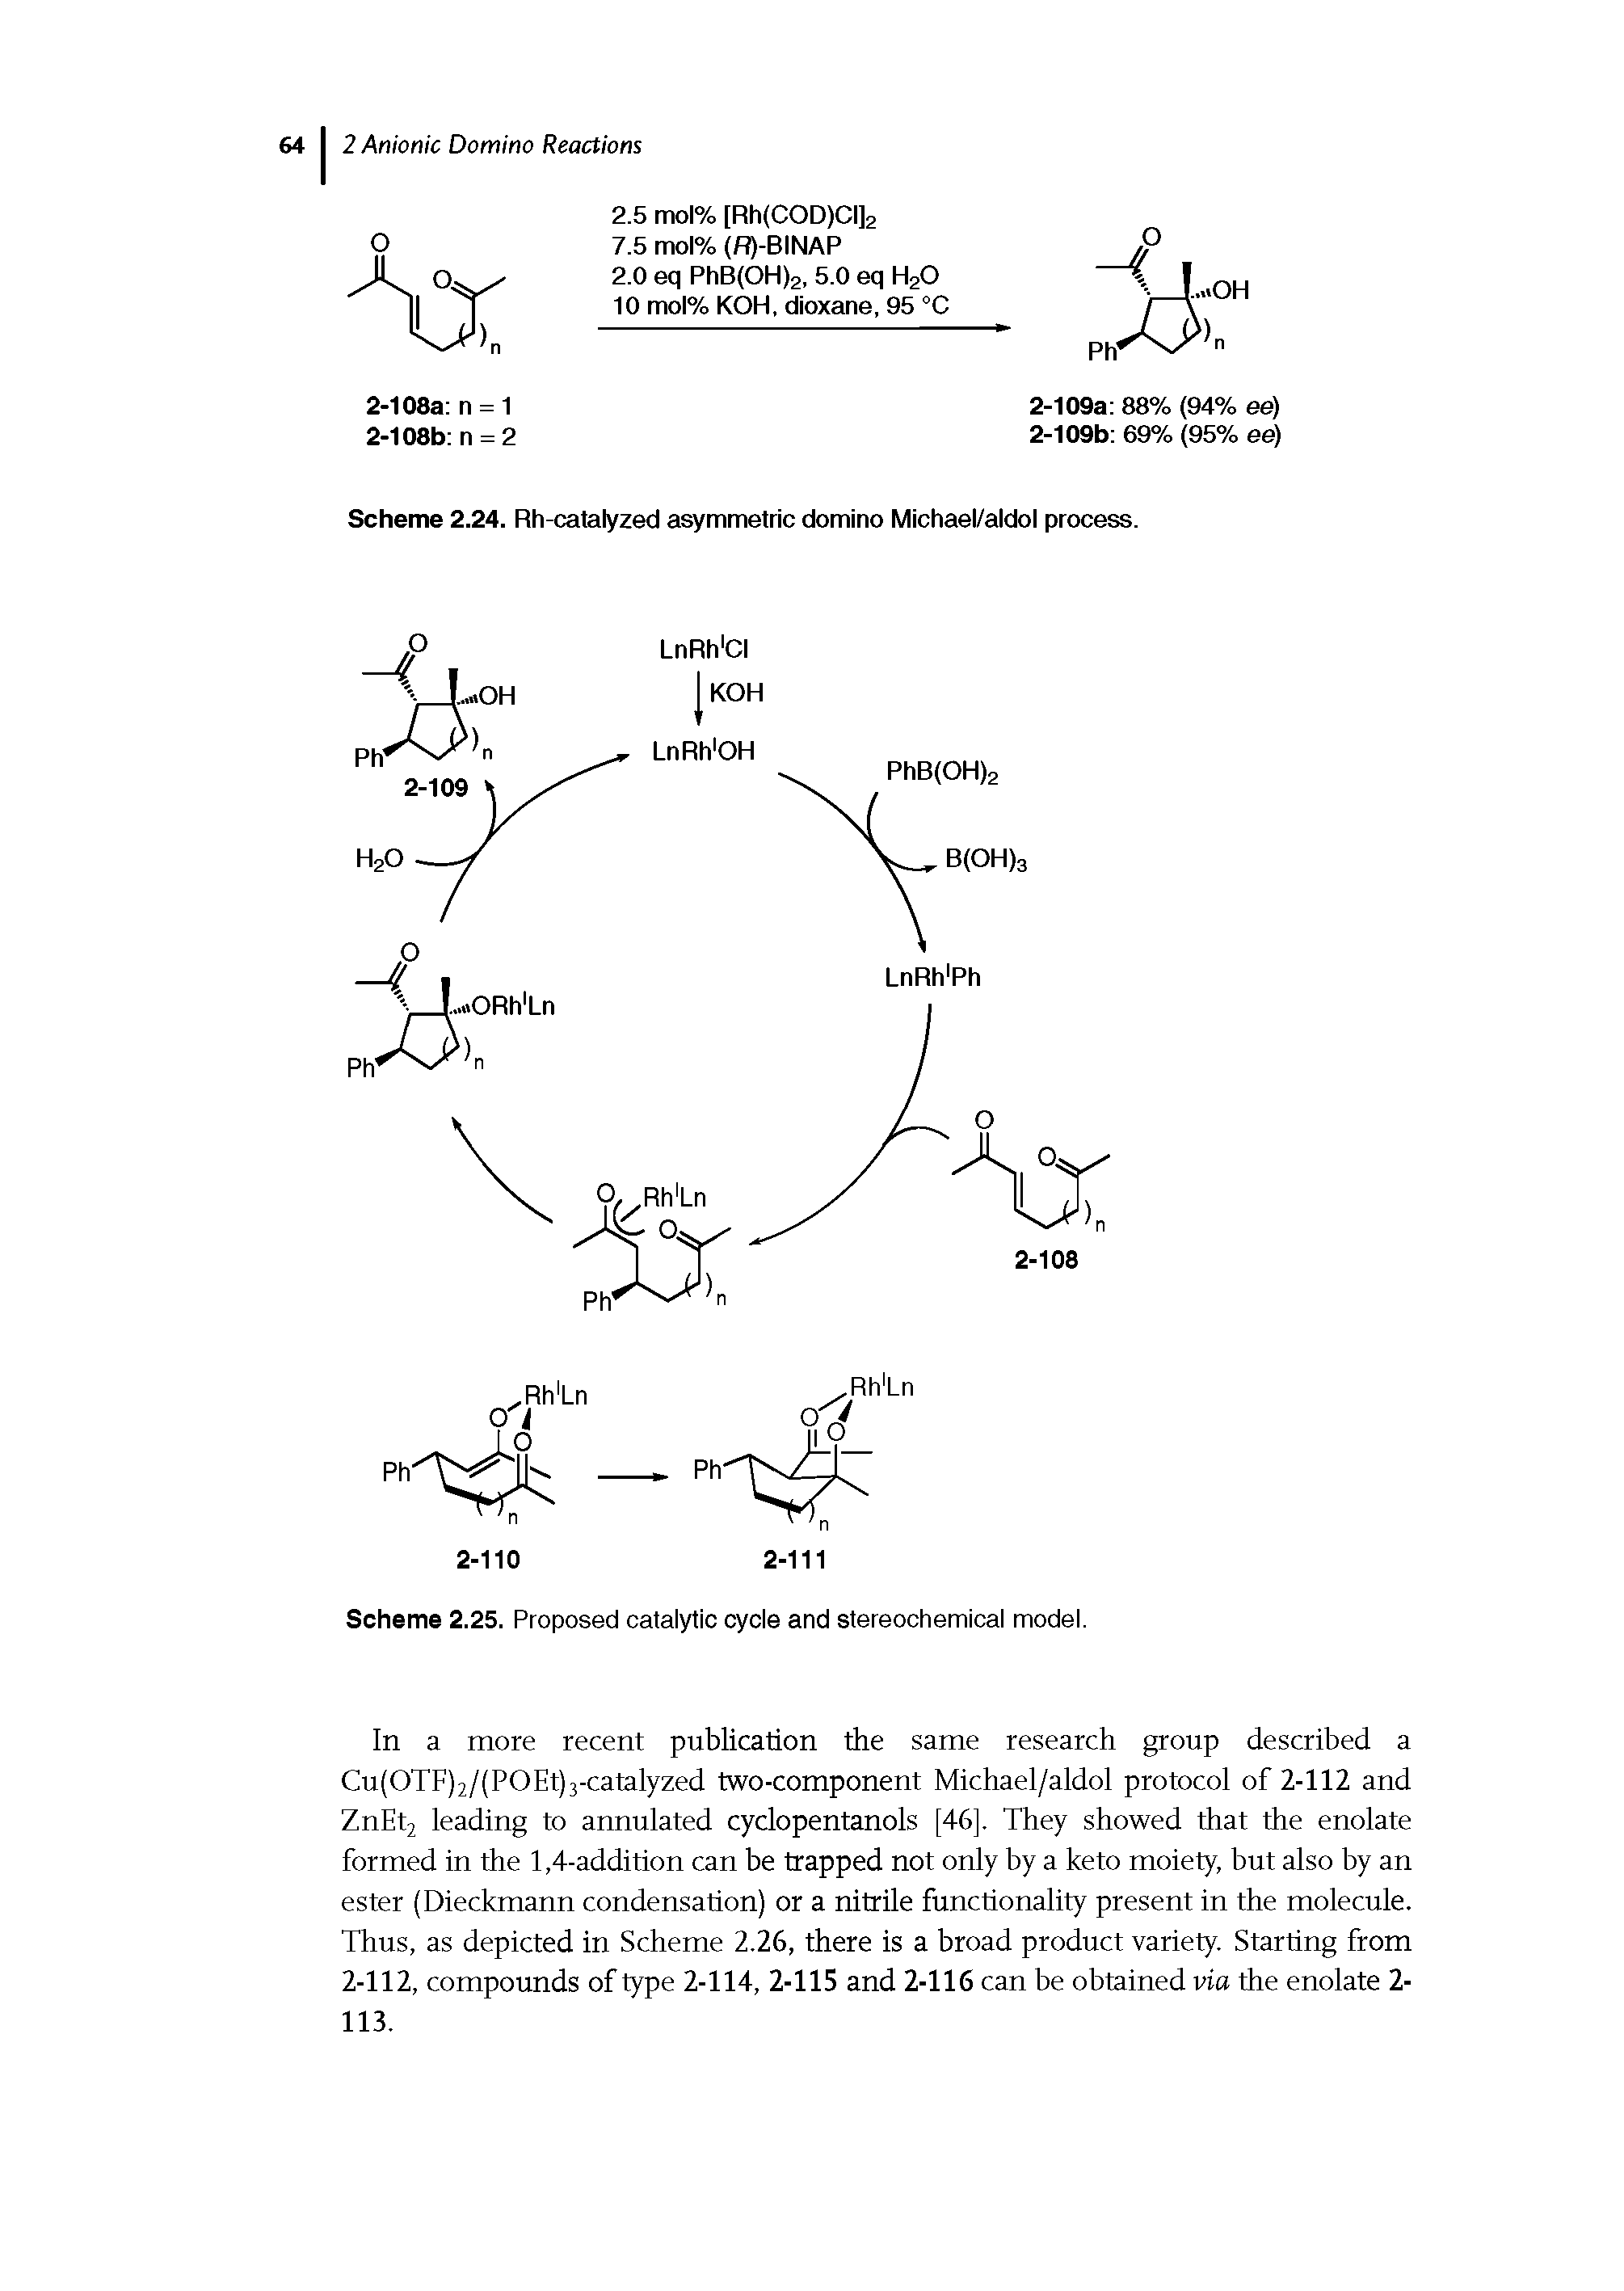 Scheme 2.25. Proposed catalytic cycle and stereochemical model.